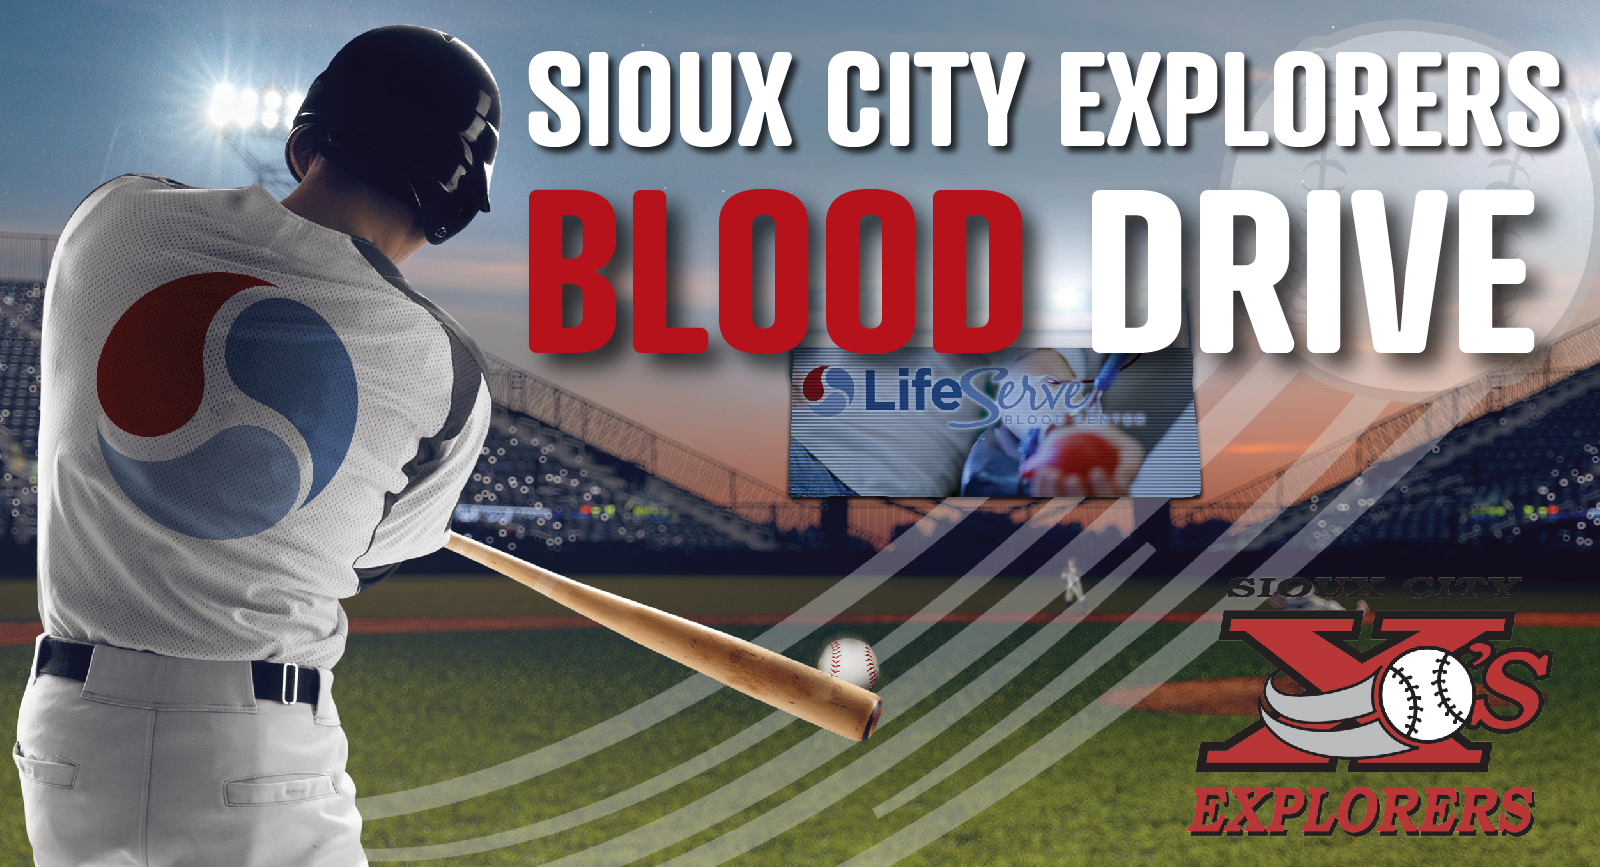 The Sioux City Explorers Blood Drive